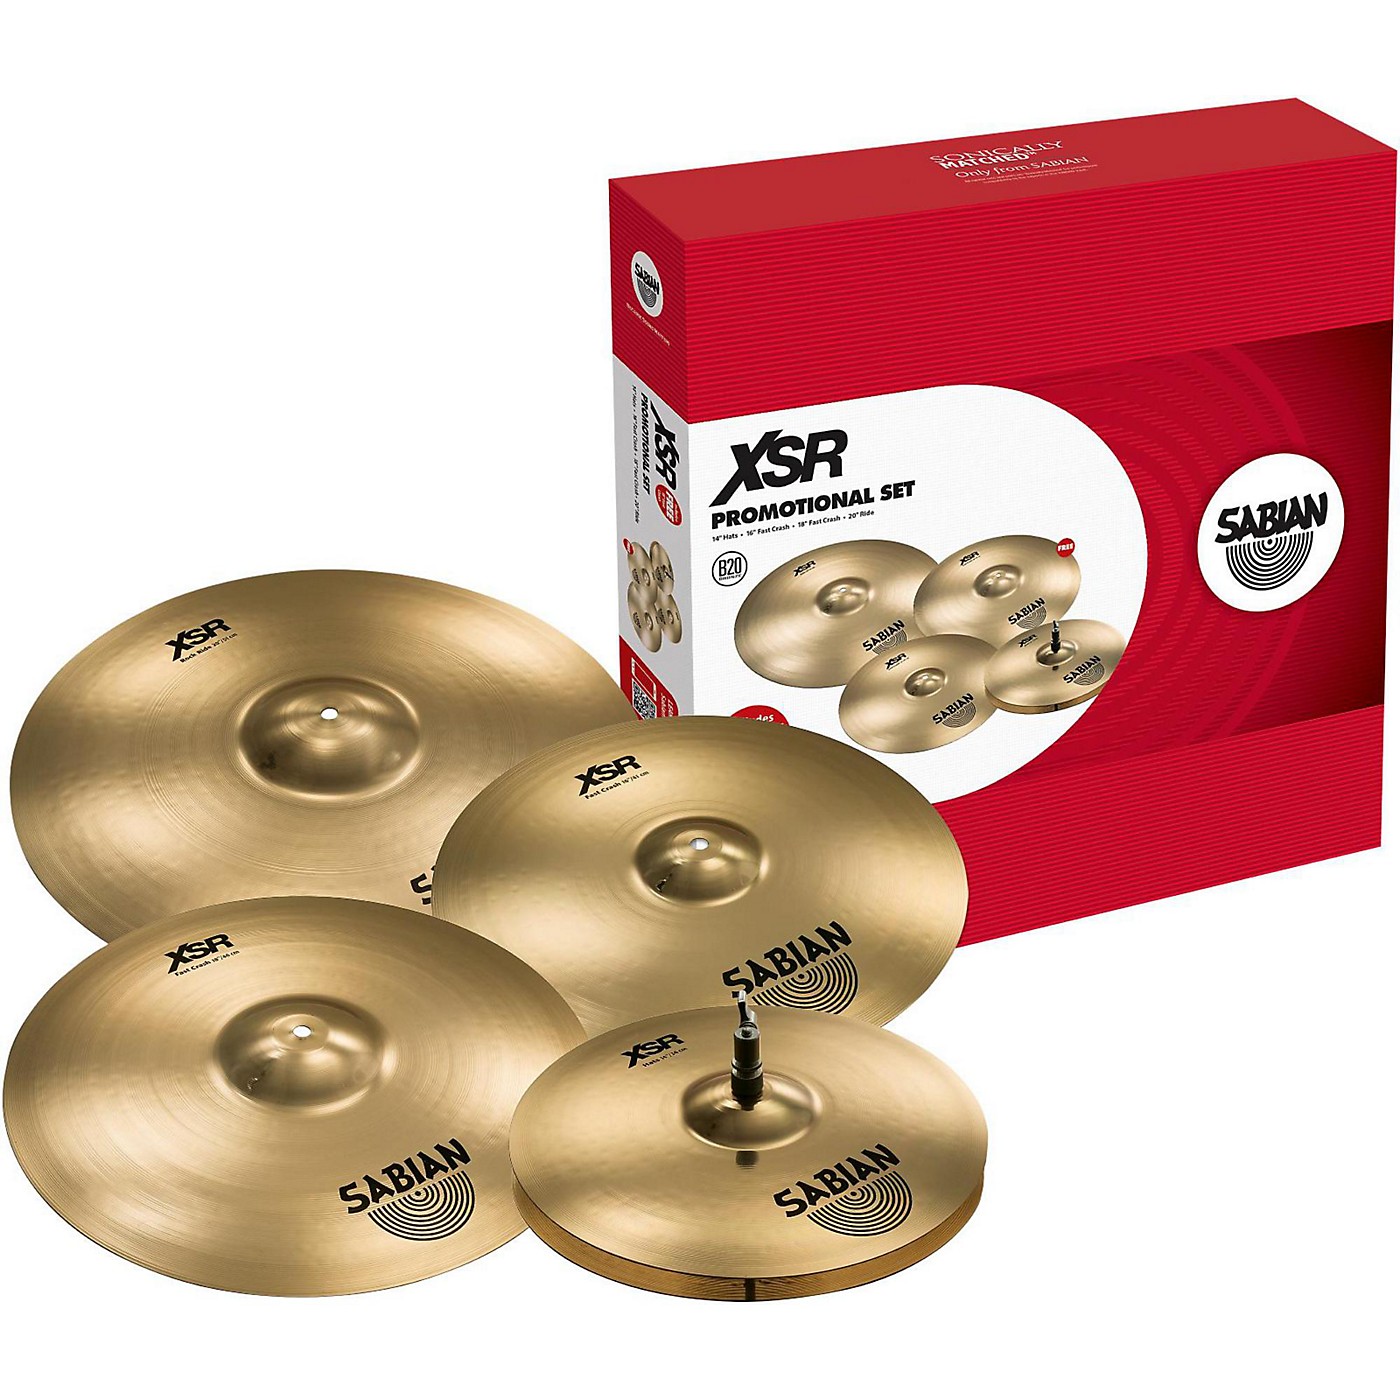 Sabian XSR Series Performance Set With a Free 18